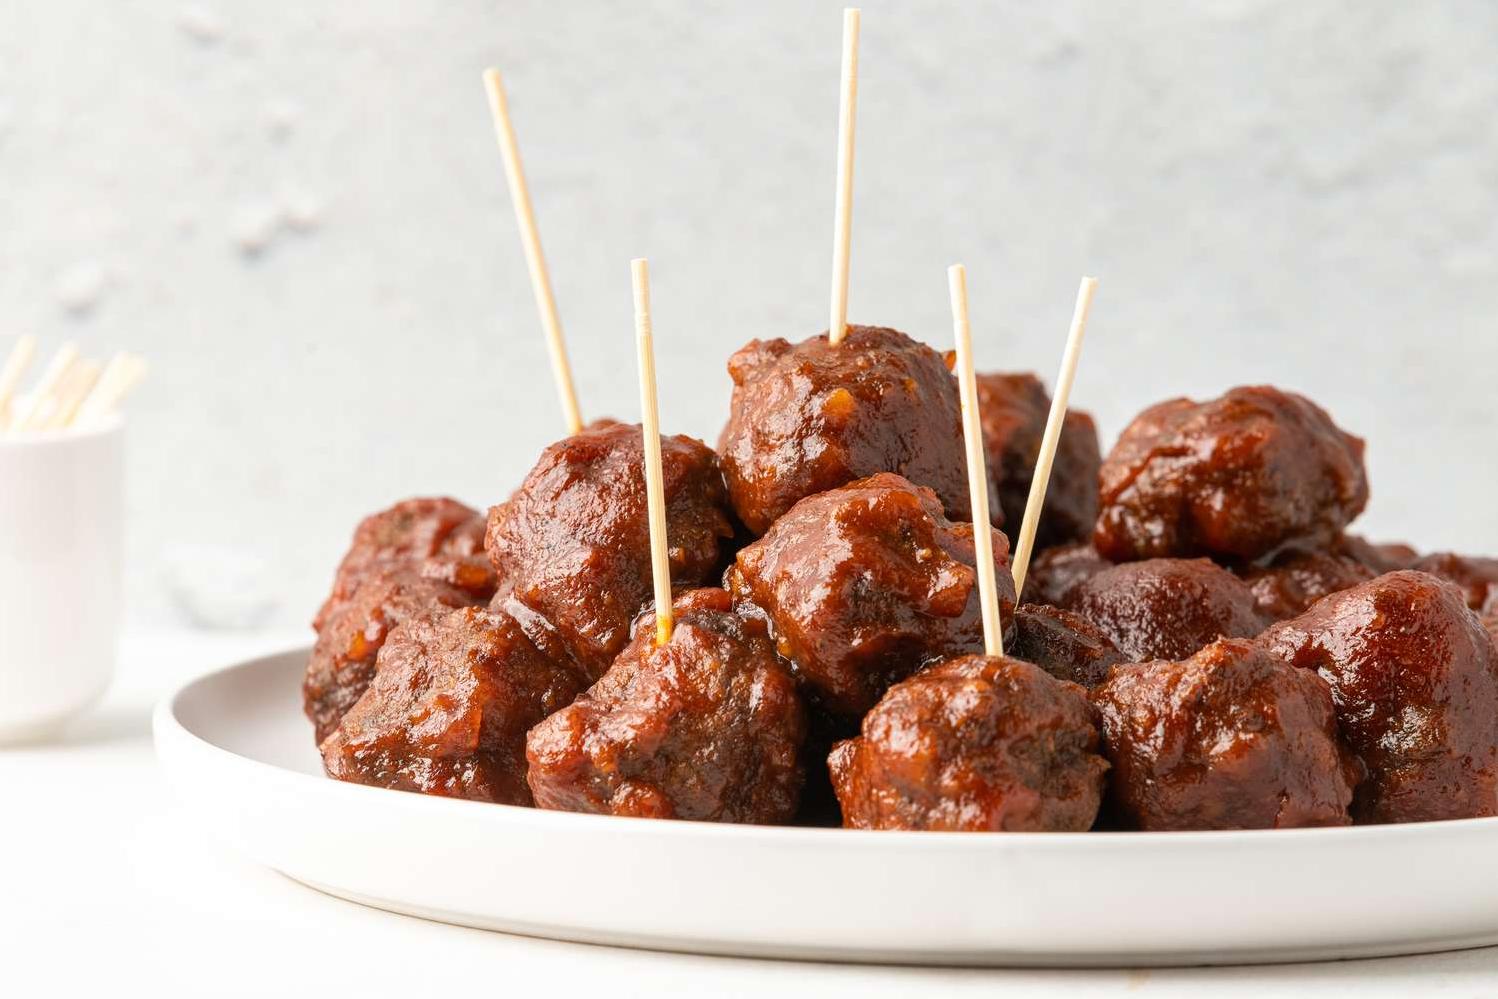  These meatballs are so delicious, you won't even realize they're actually packed with protein.